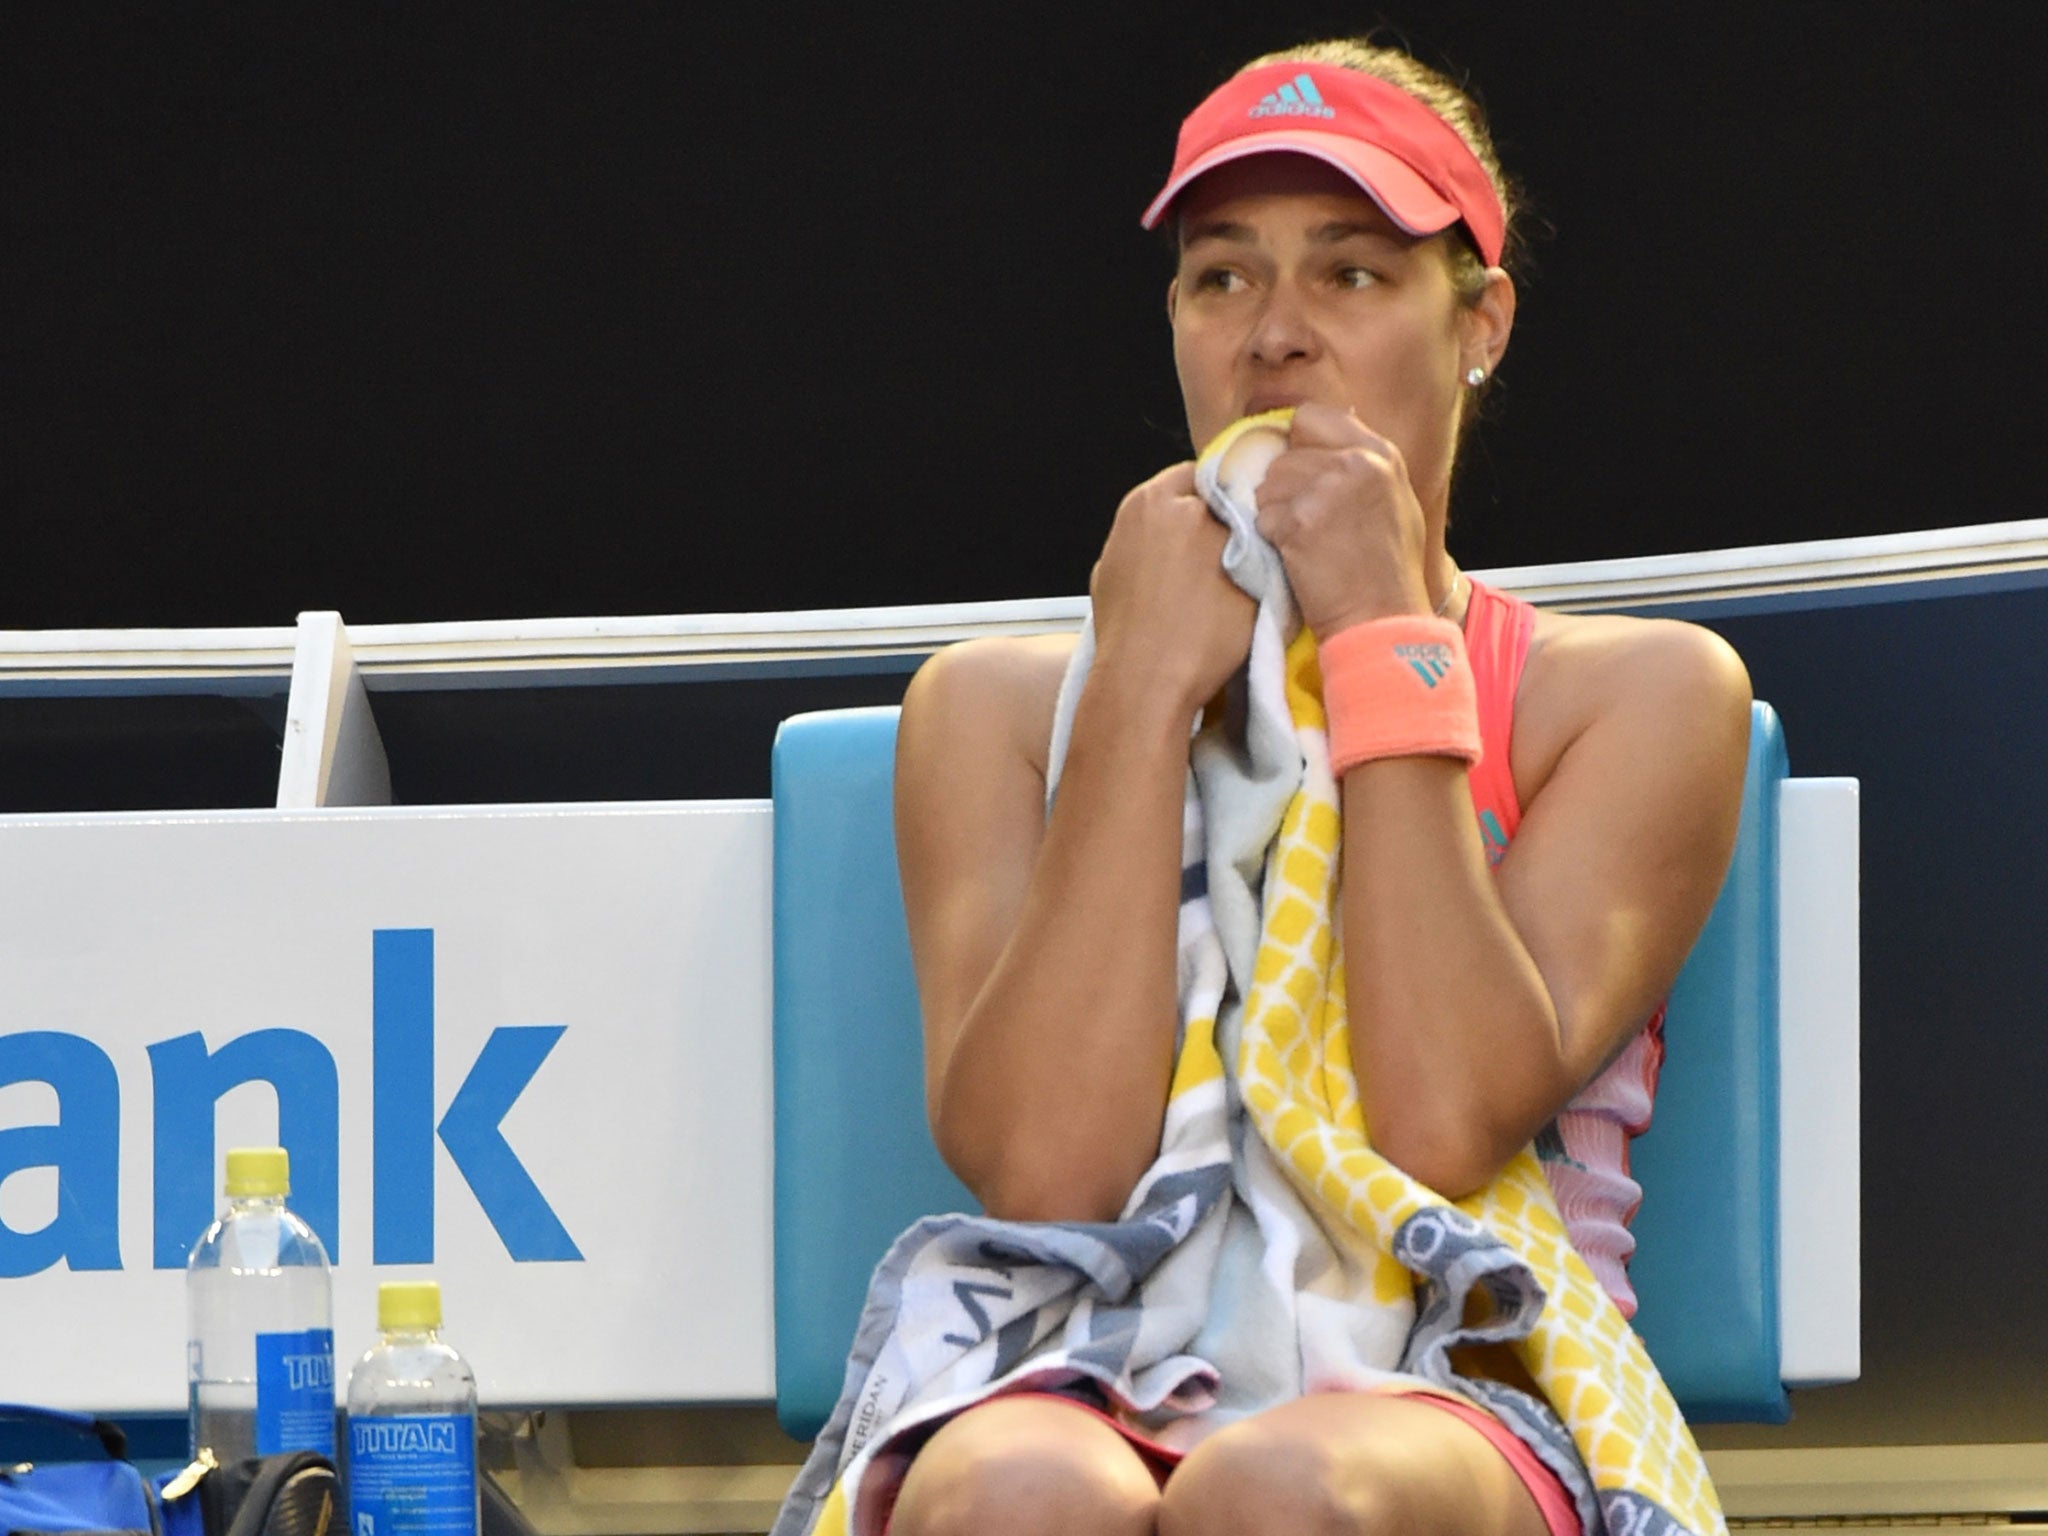 Ana Ivanovic appears concerns after her coach, Nigel Sears, collapsed during her match against Madison Keys